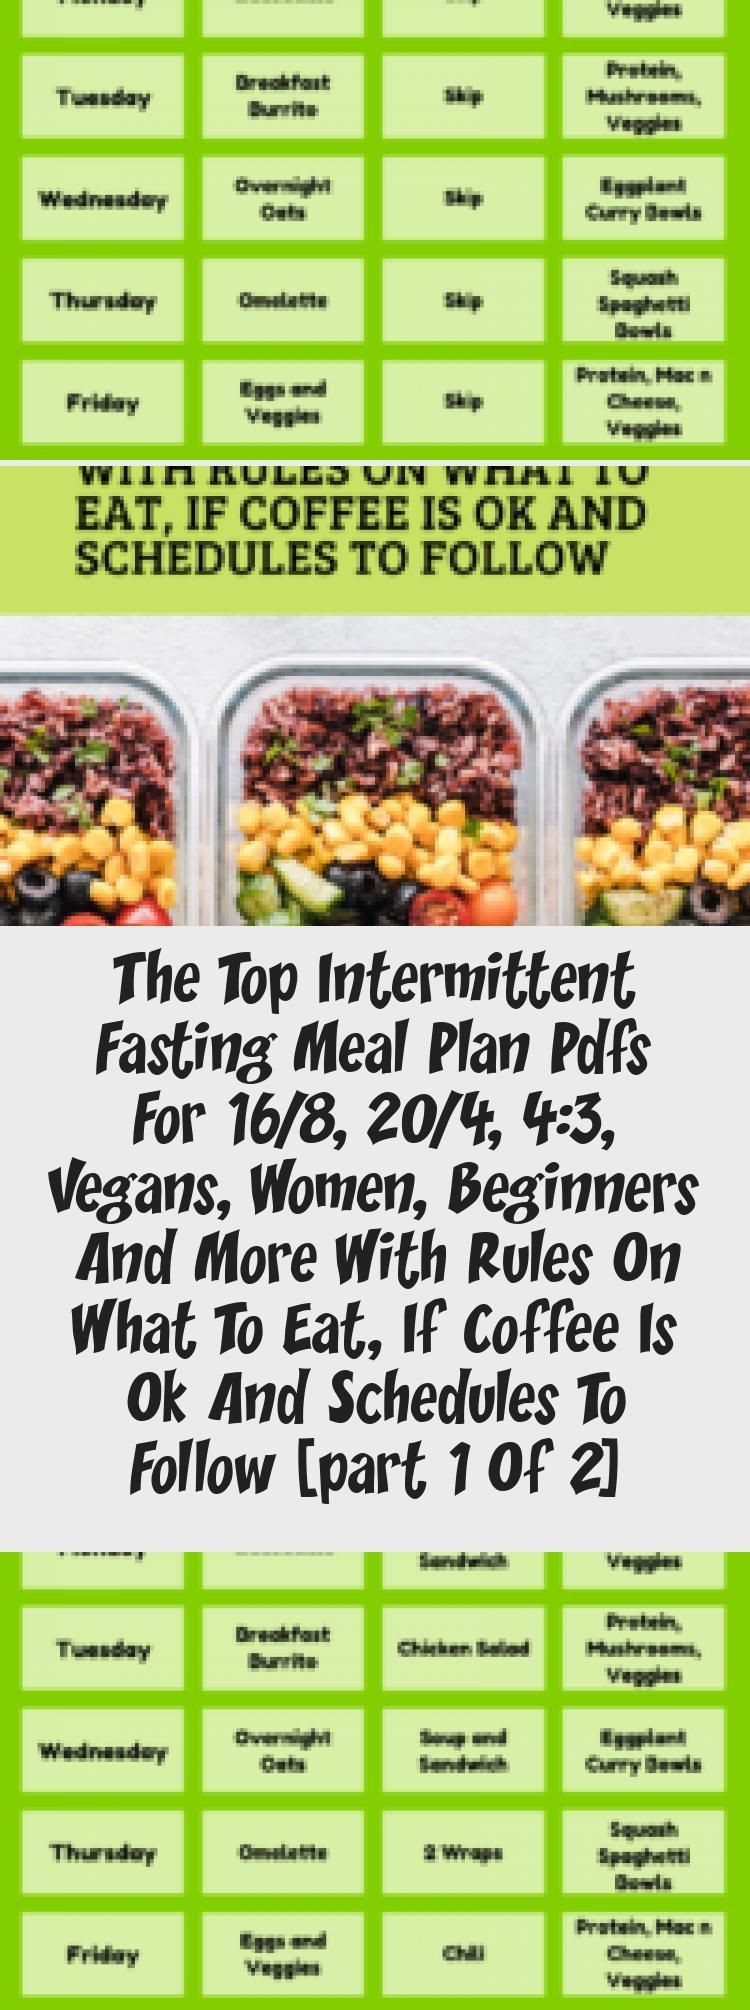 Intermittent Fasting Vegan Plan
 The Top Intermittent Fasting Meal Plan PDFs for 16 8 20 4